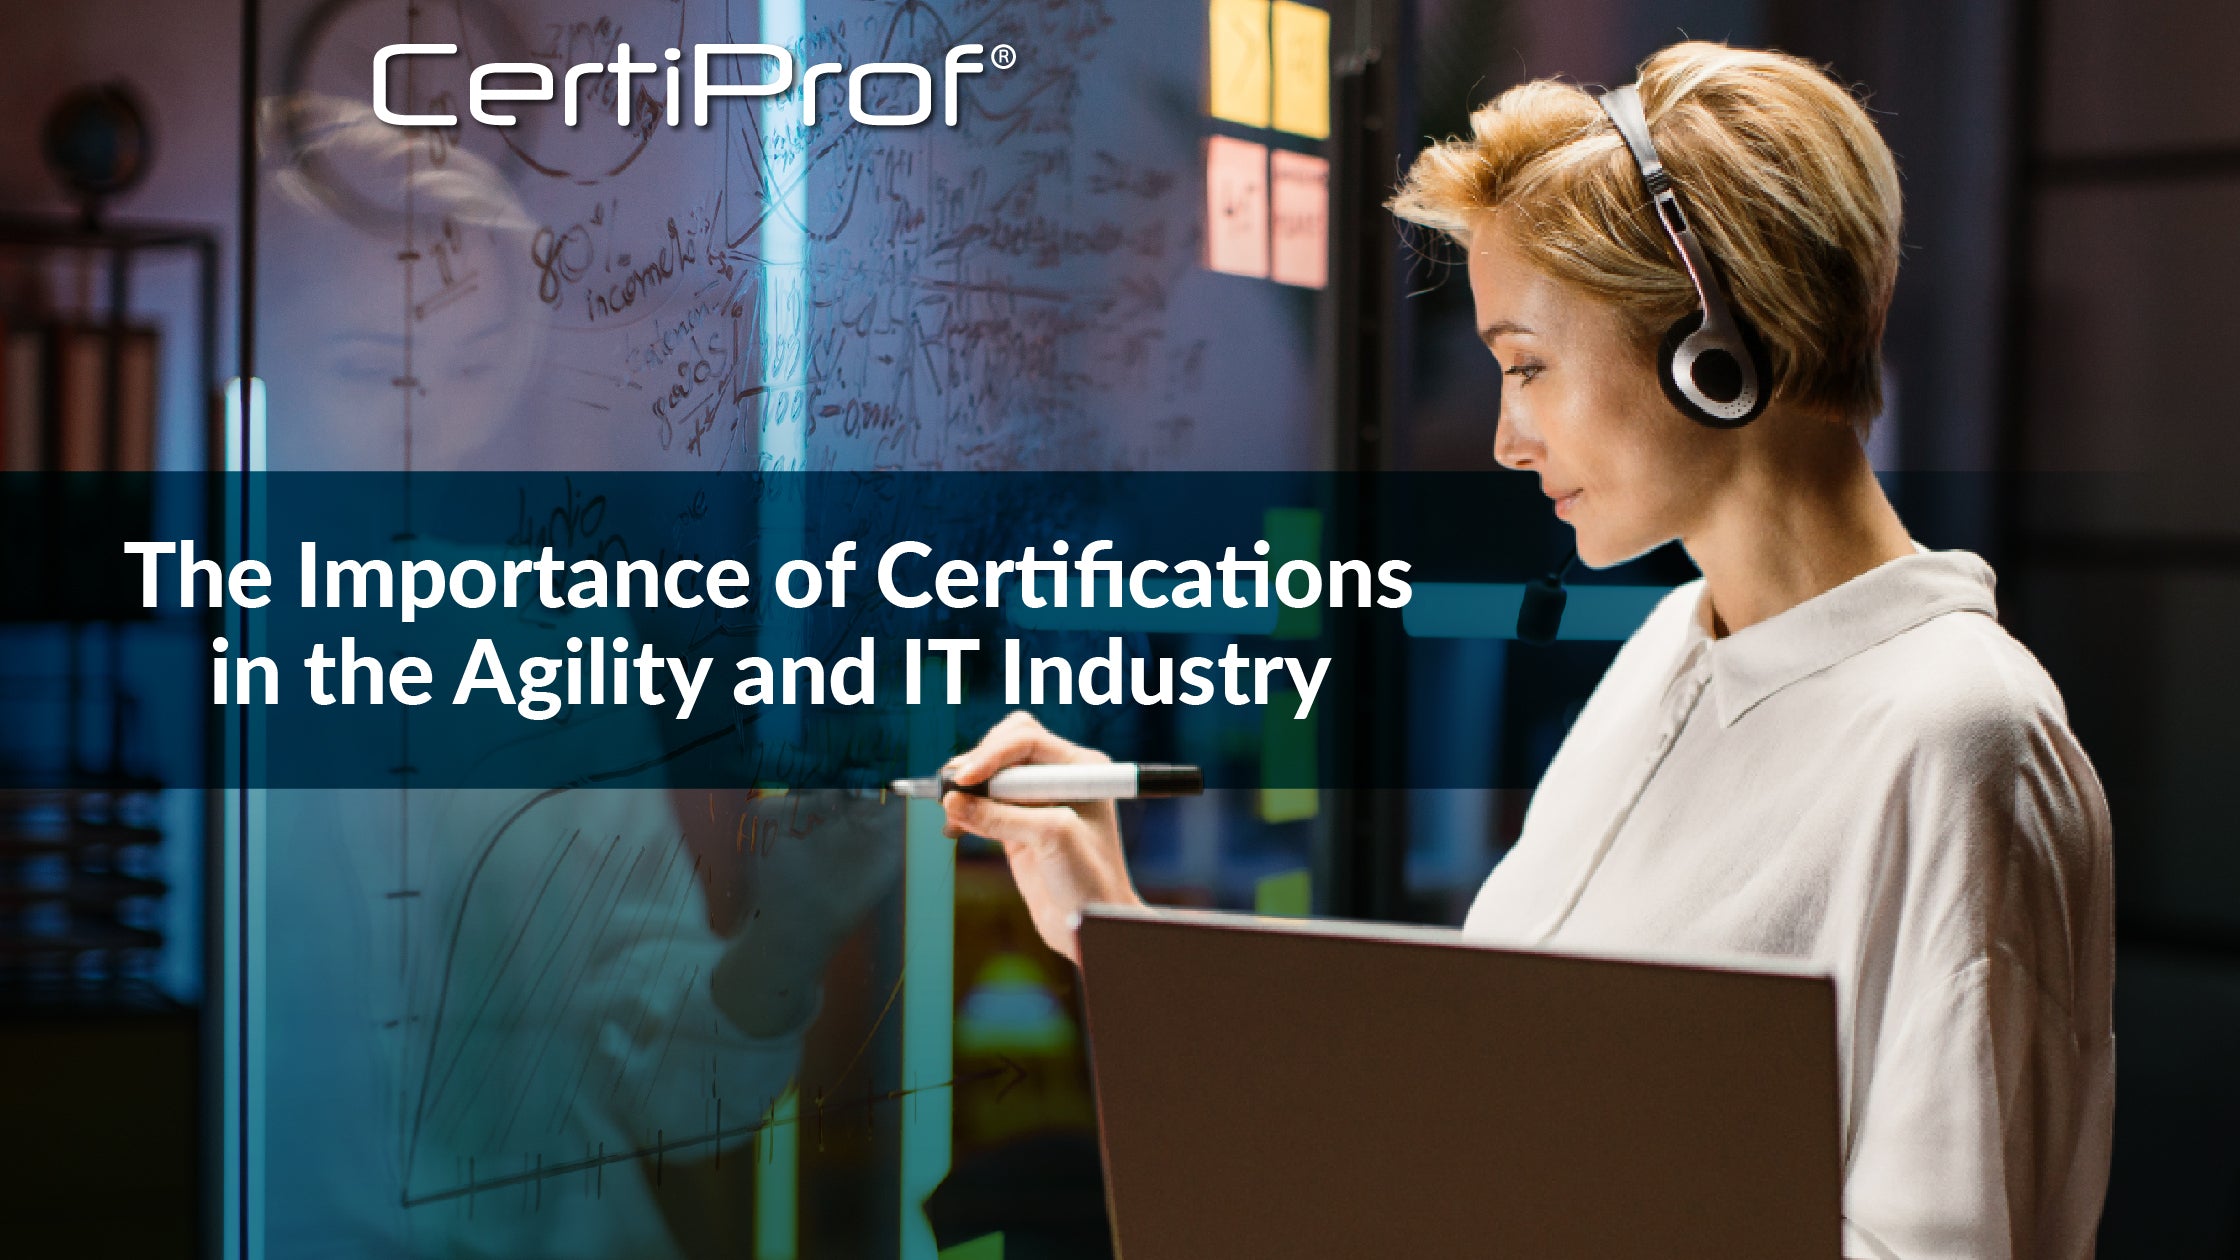 The Importance of Certifications in the Agility and IT Industry